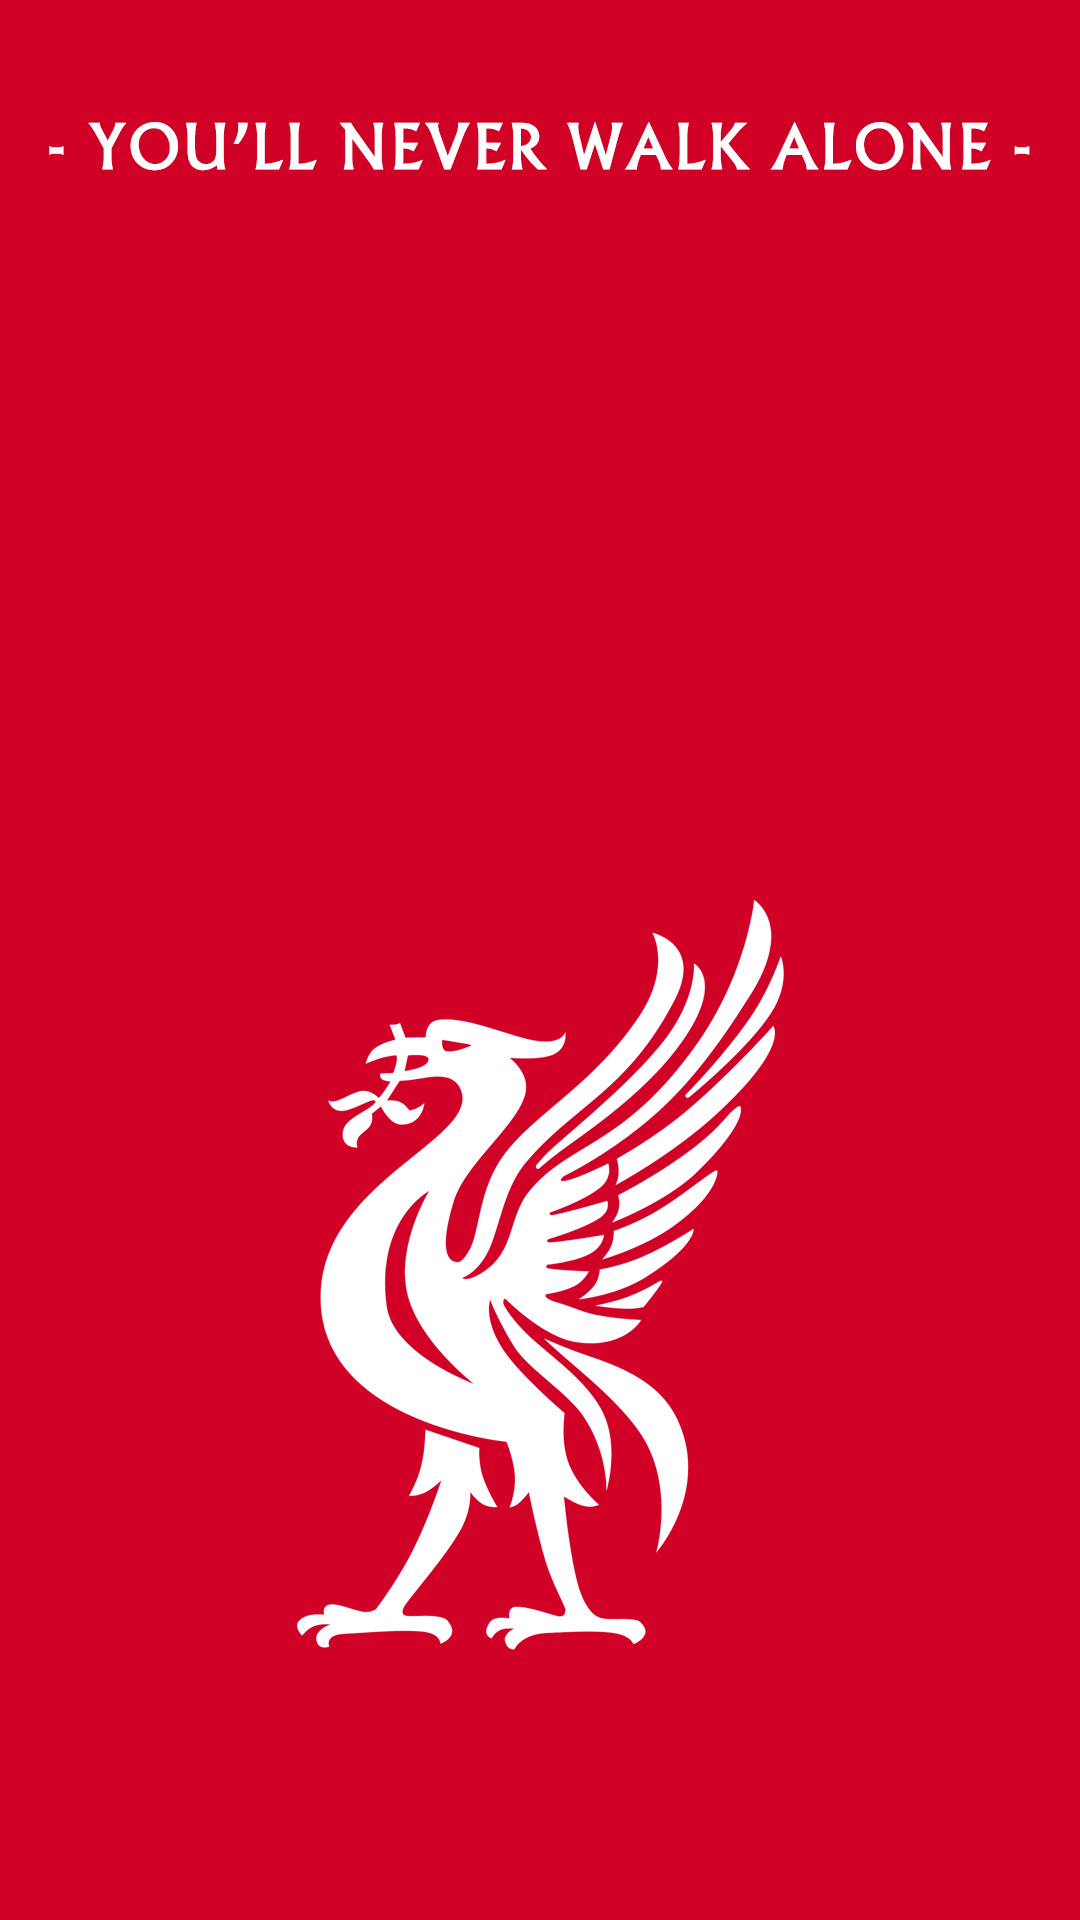 Liverpool Football Club: You'll Never Walk Alone, sung by supporters before every home match. 1080x1920 Full HD Wallpaper.